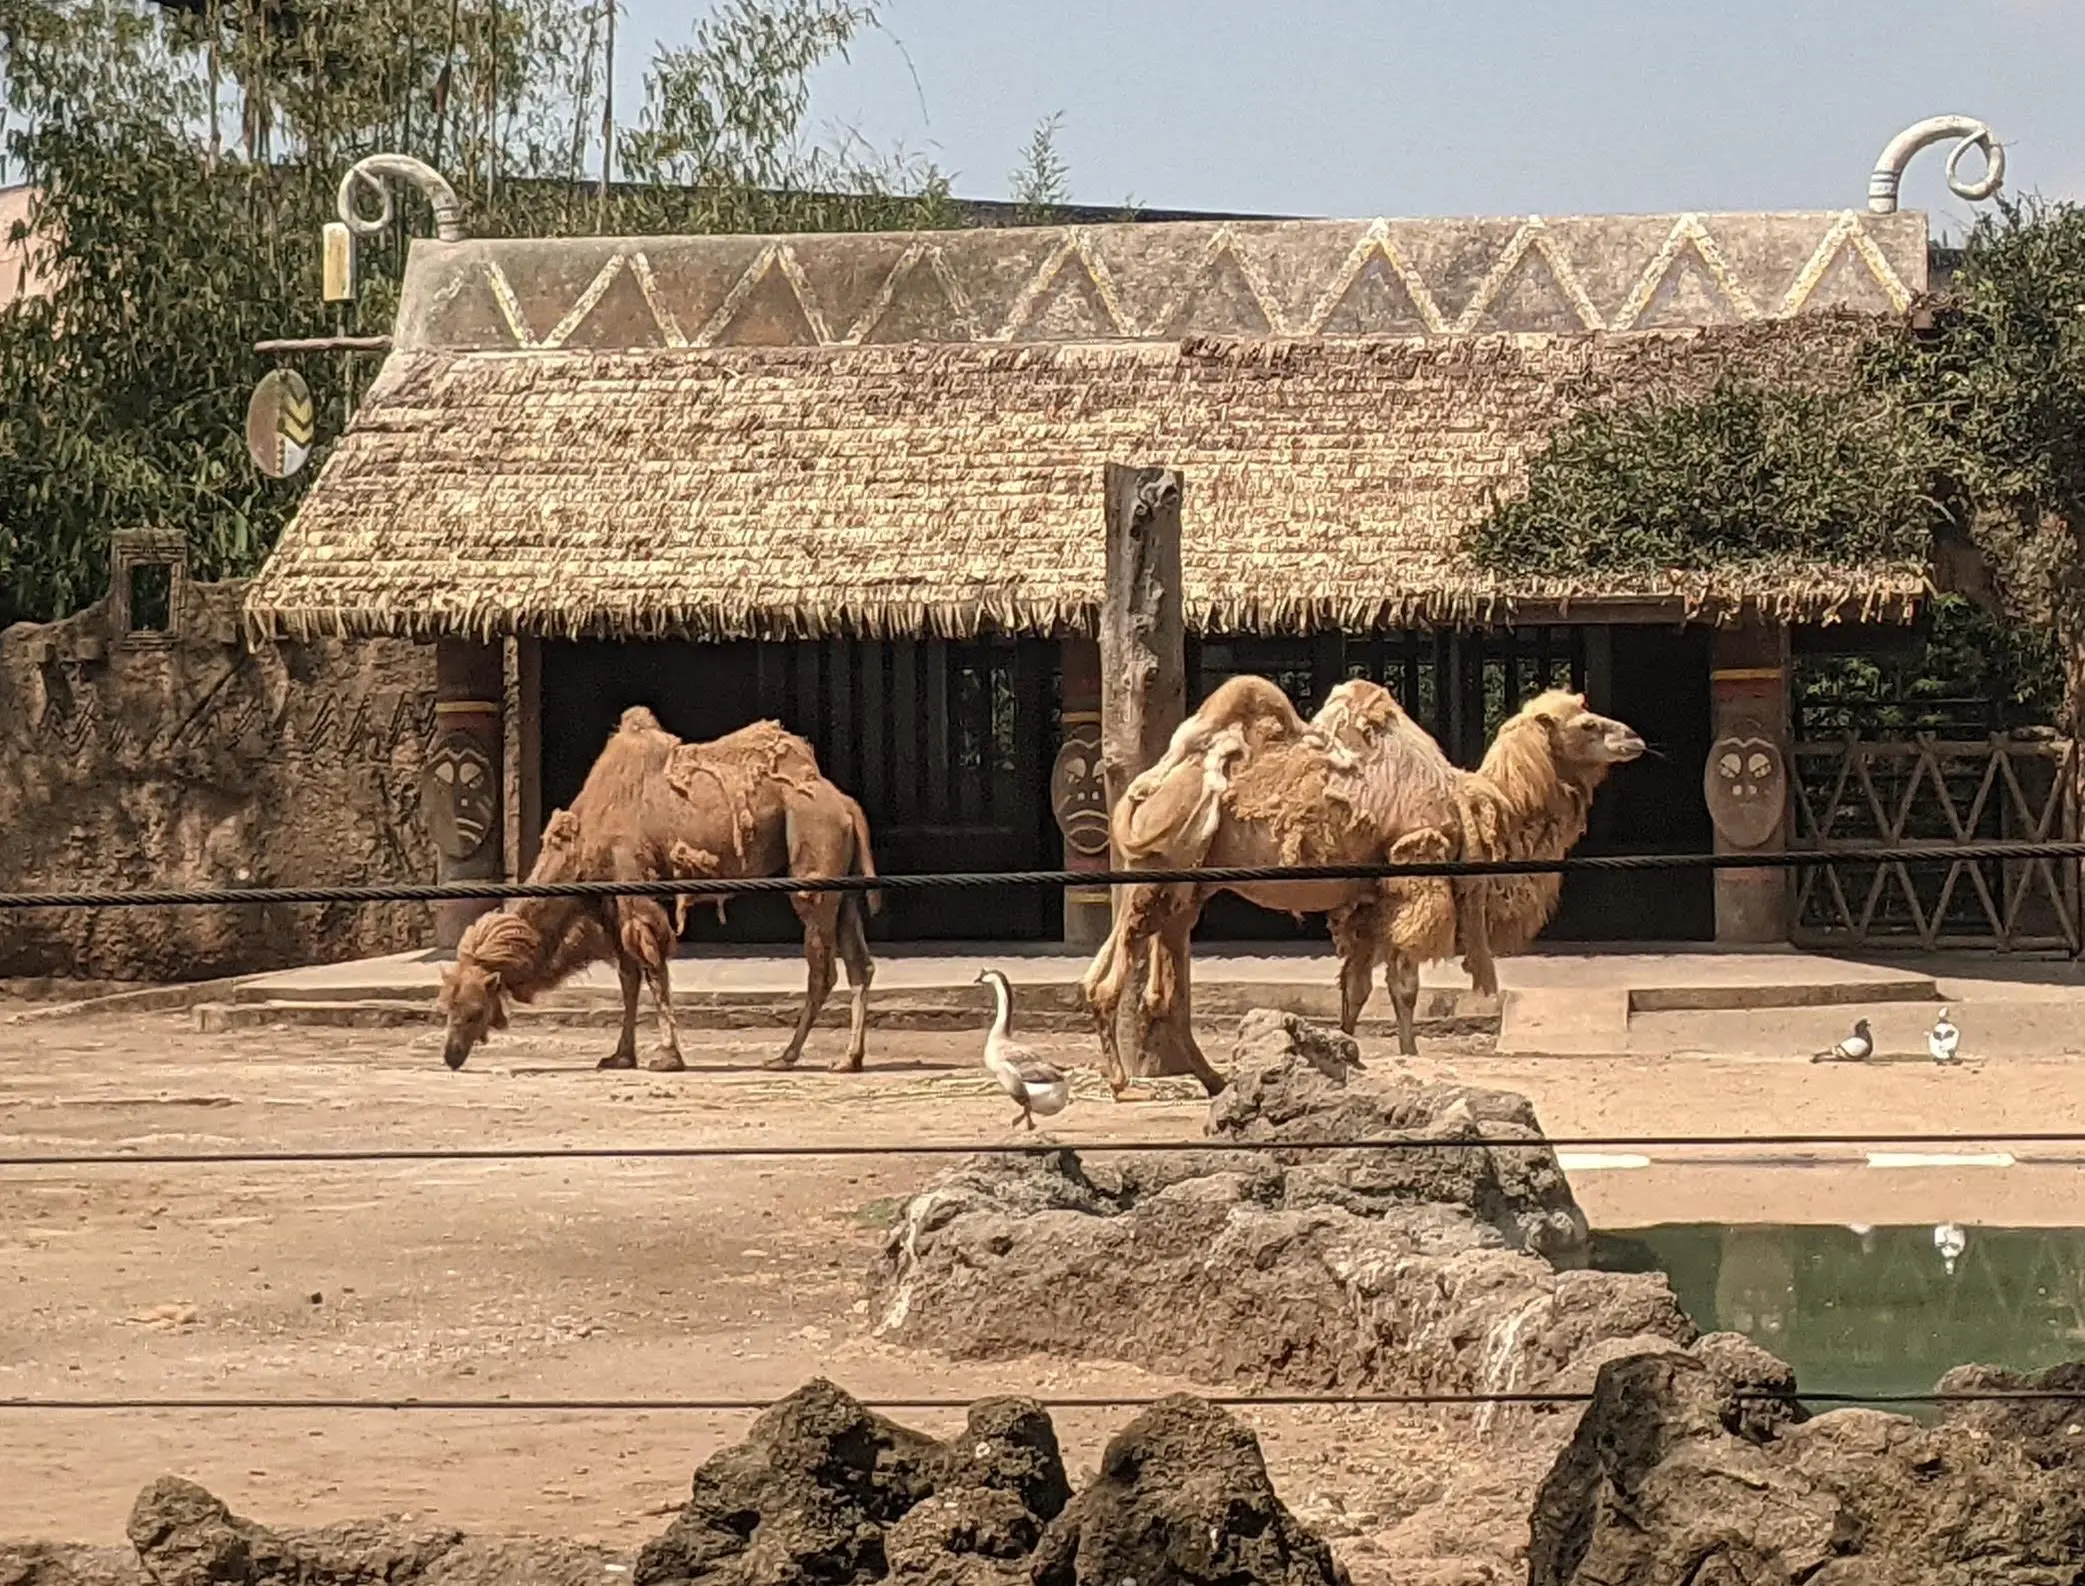 Two Camels at the Aurora Zoo